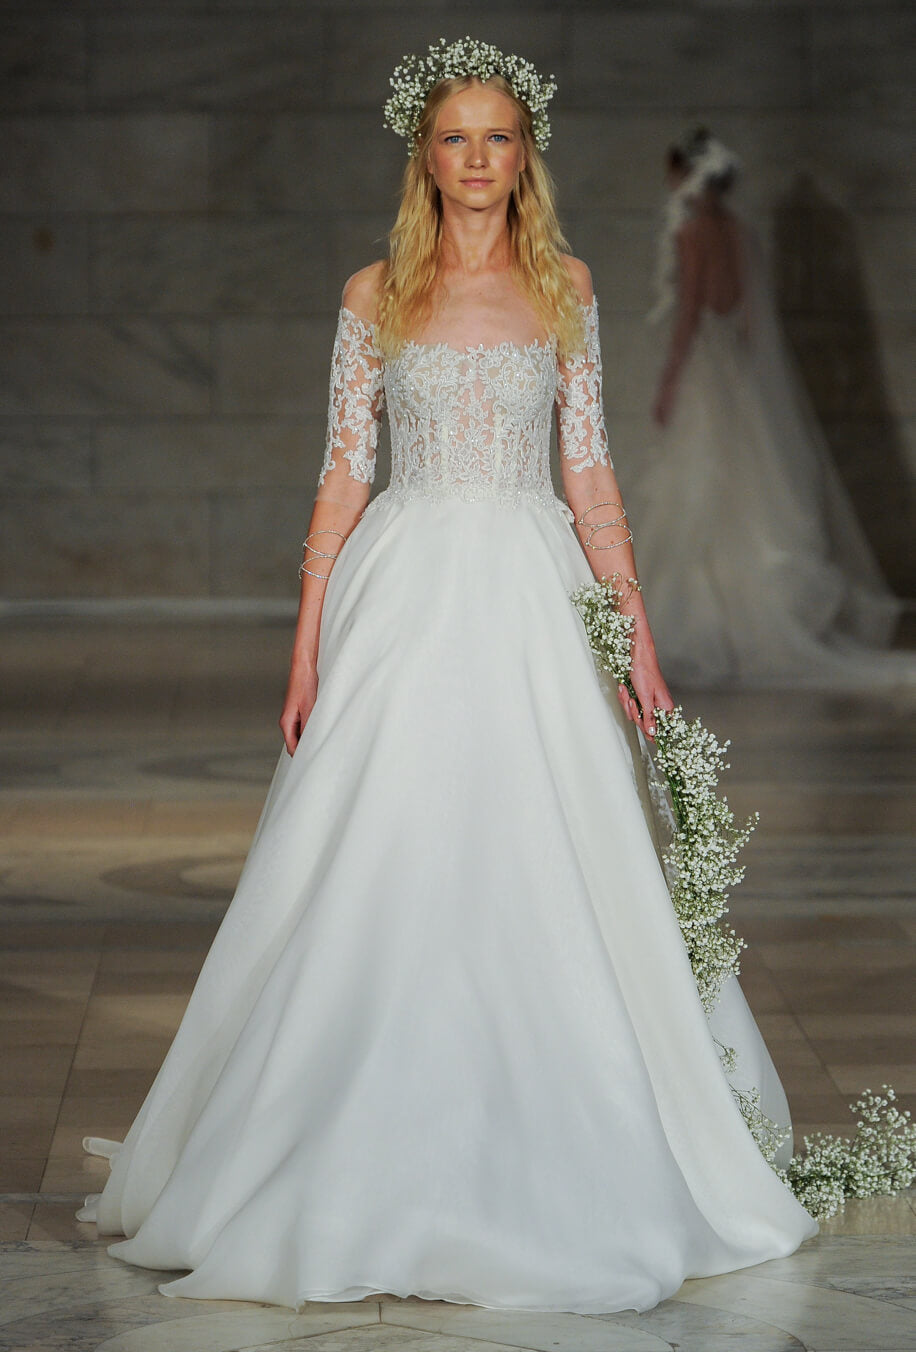 Reem Acra “Love and Dream” Bridal Collection